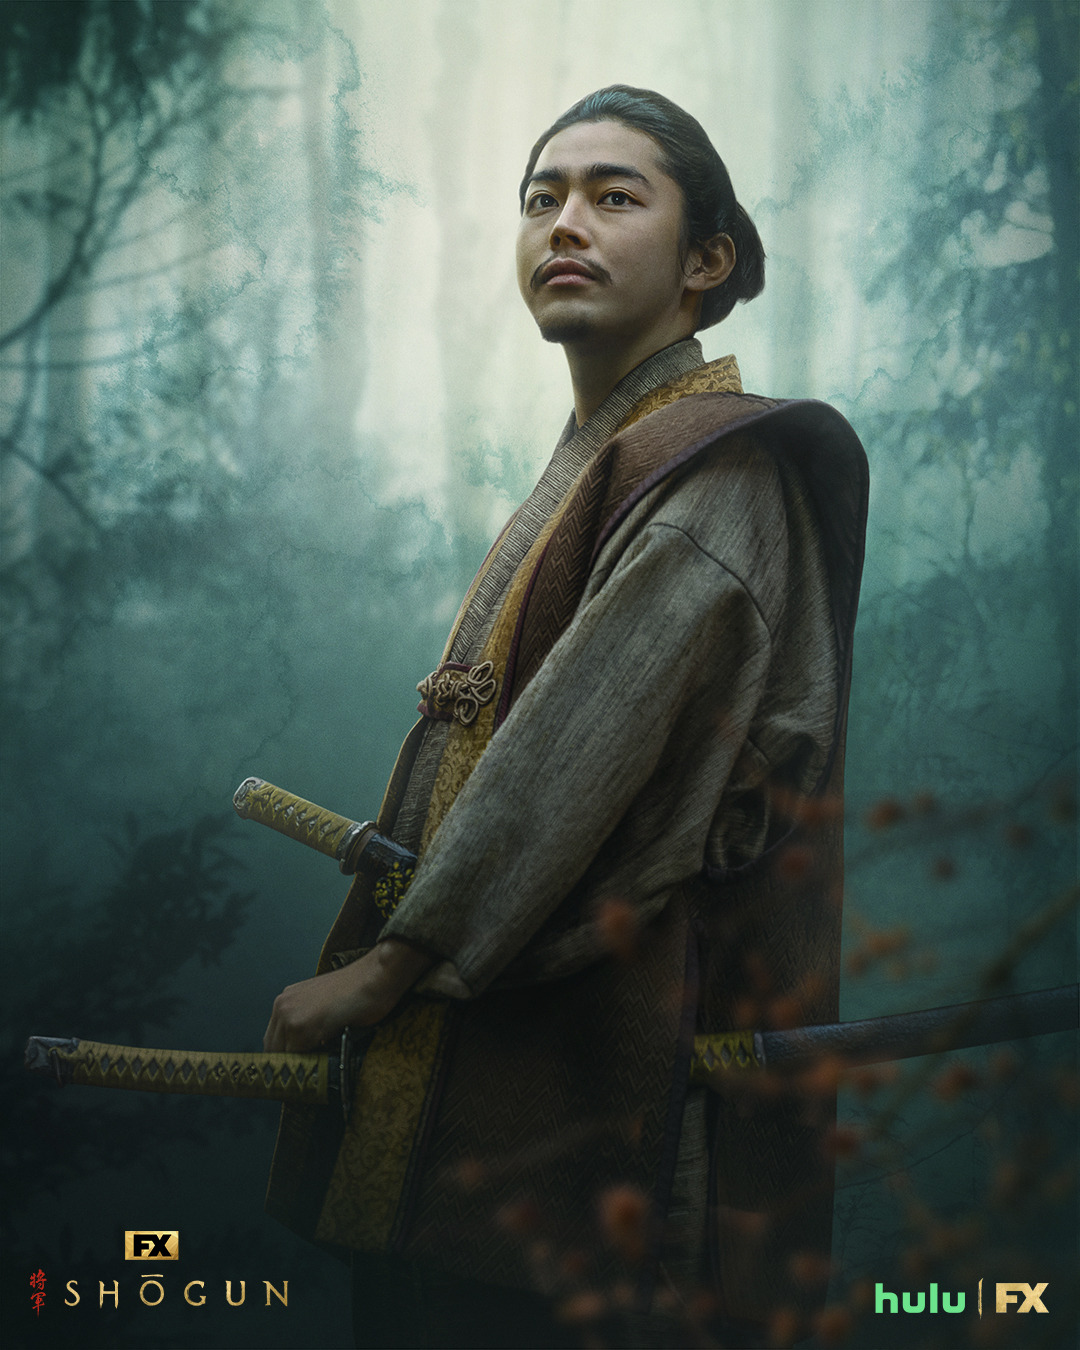 Extra Large TV Poster Image for Shogun (#11 of 24)